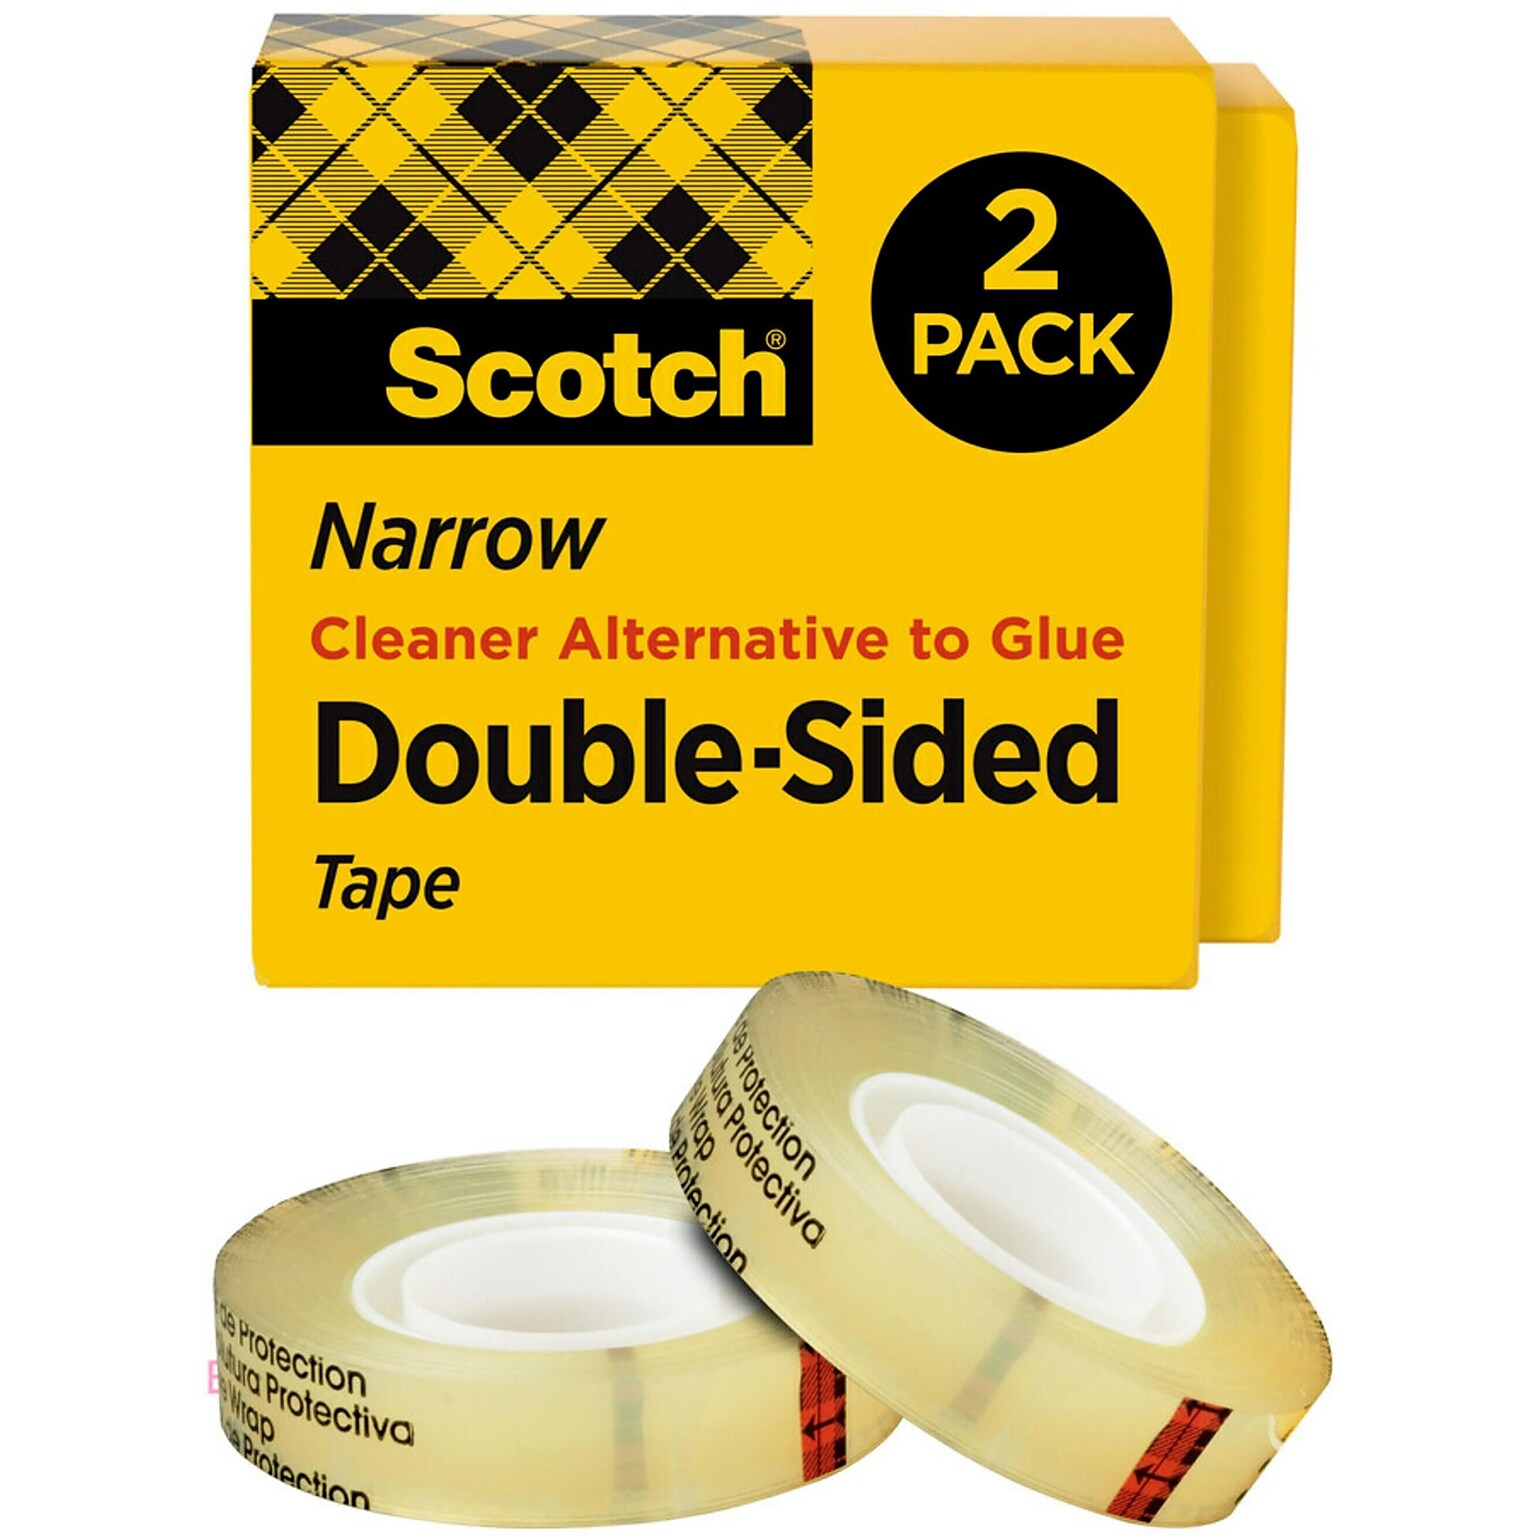 Scotch Permanent Double Sided Tape, 1/2 in x 900 in, 2 Tape Rolls, Refill, Home Office and Back to School Supplies for Classroom